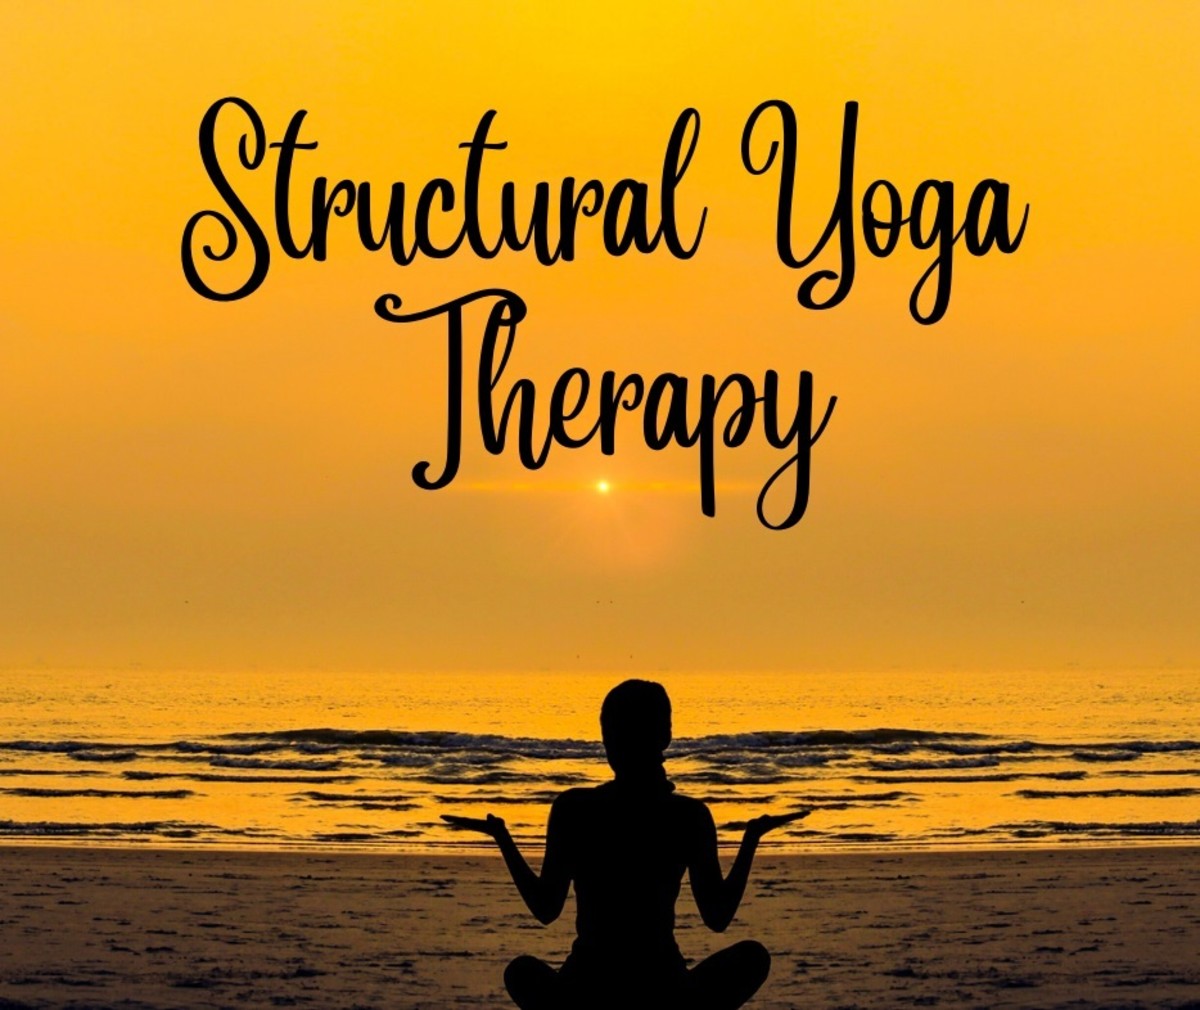 Book Review: Structural Yoga Therapy